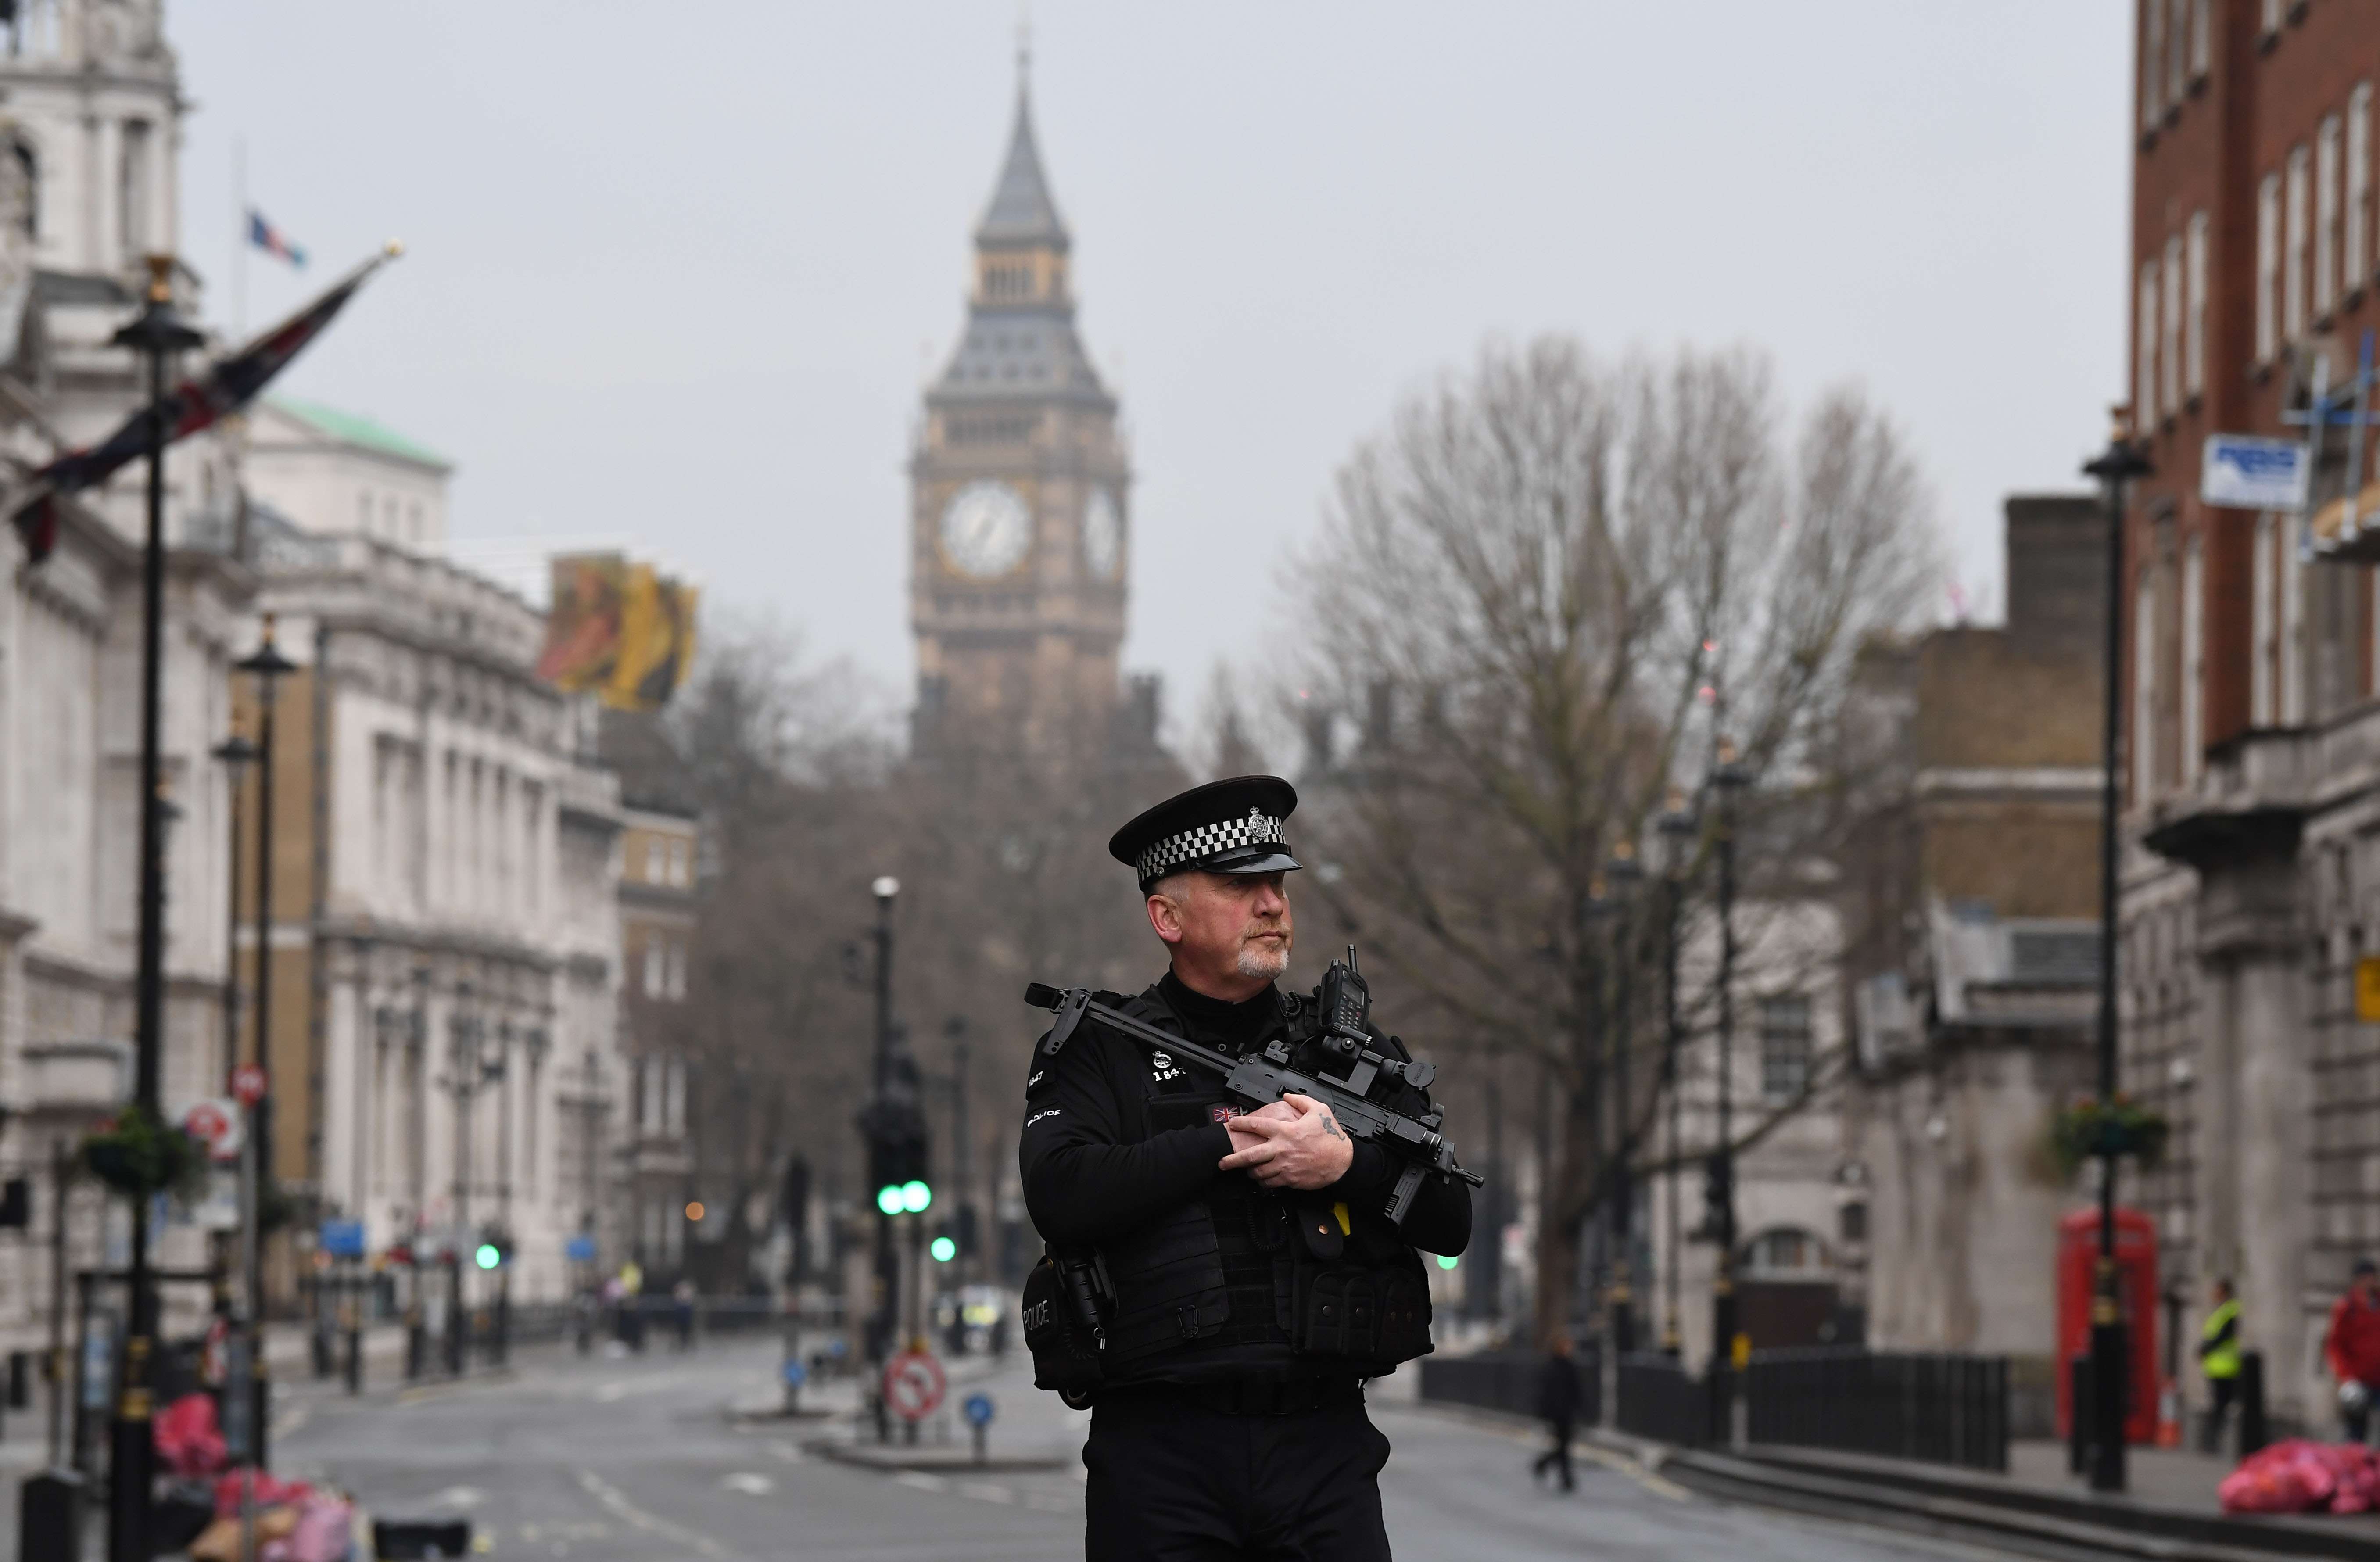 An armed police officer patrols a security cordon set up along Whitehall by the Houses of Parliament in London. Photo: AFP